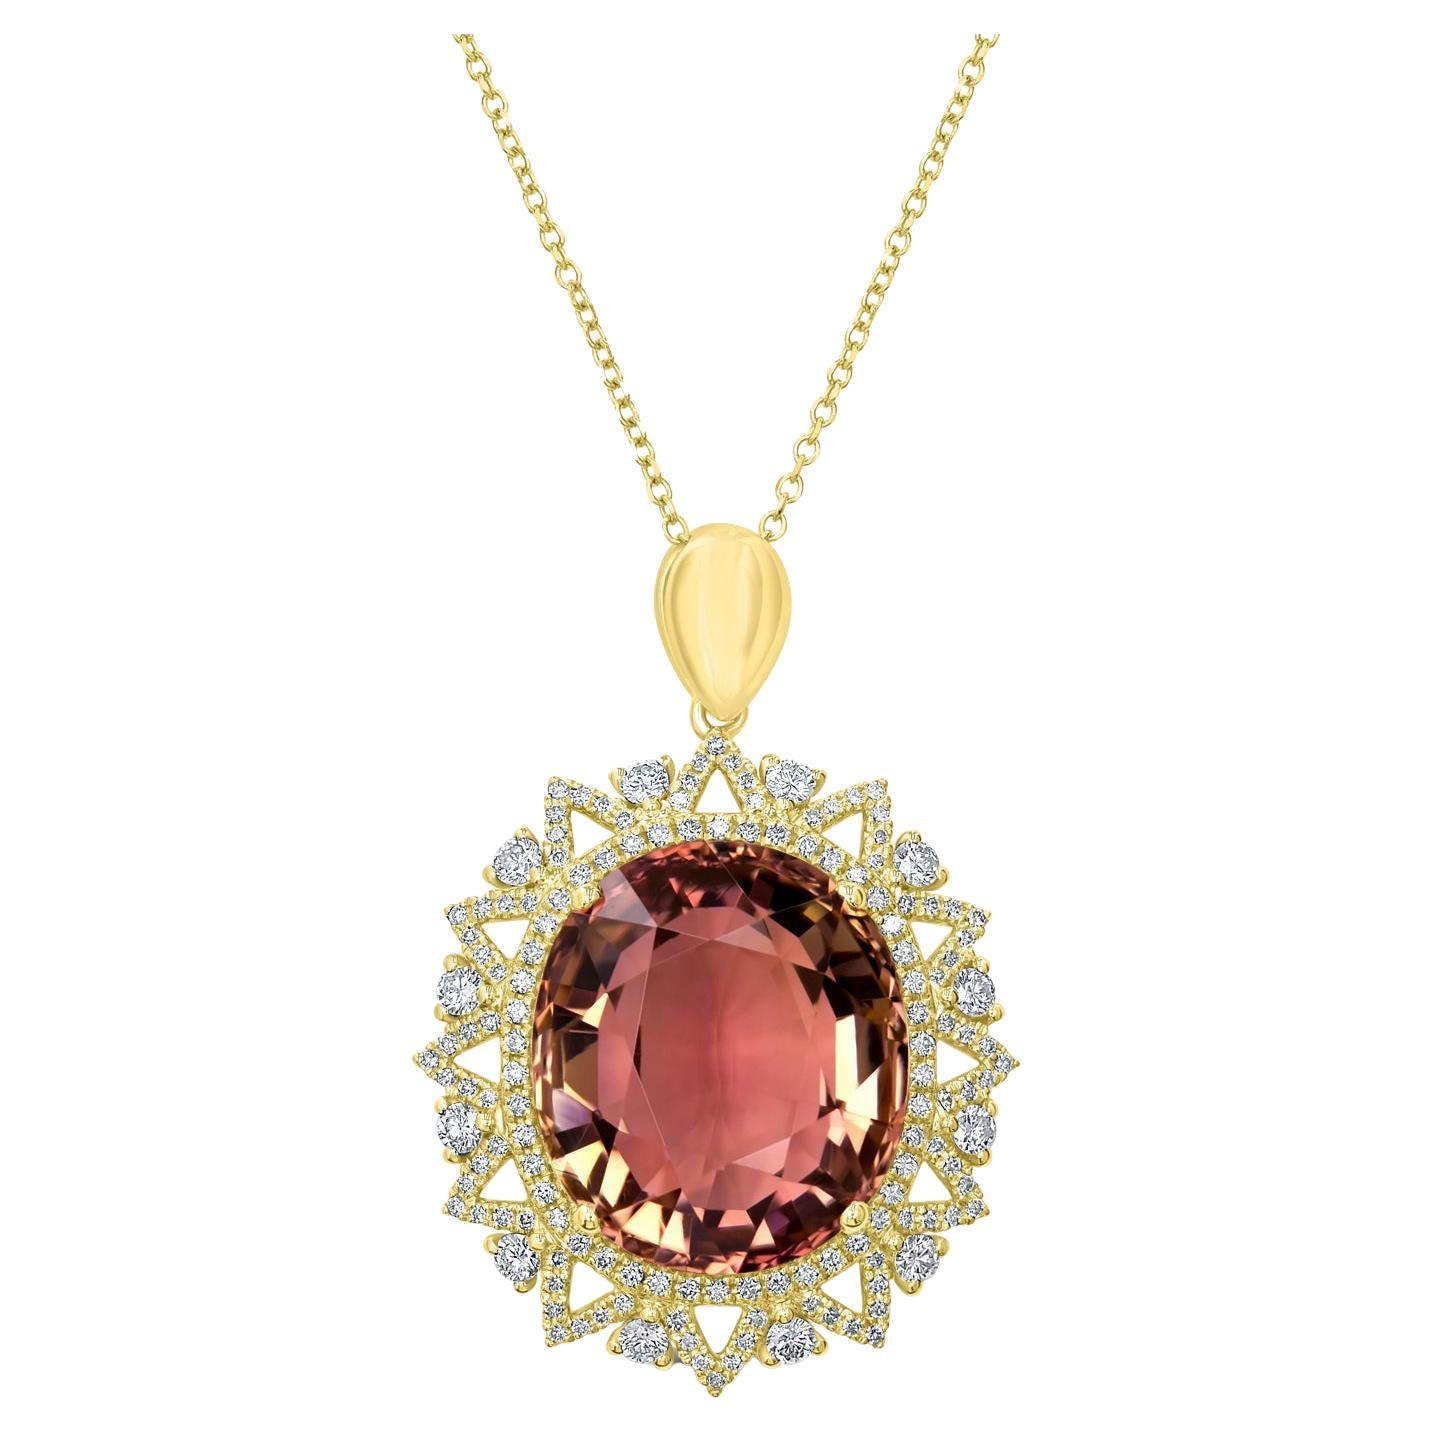 18.74ct Tourmaline Pendant with 0.83tct Diamonds Set in 18k Yellow Gold For Sale